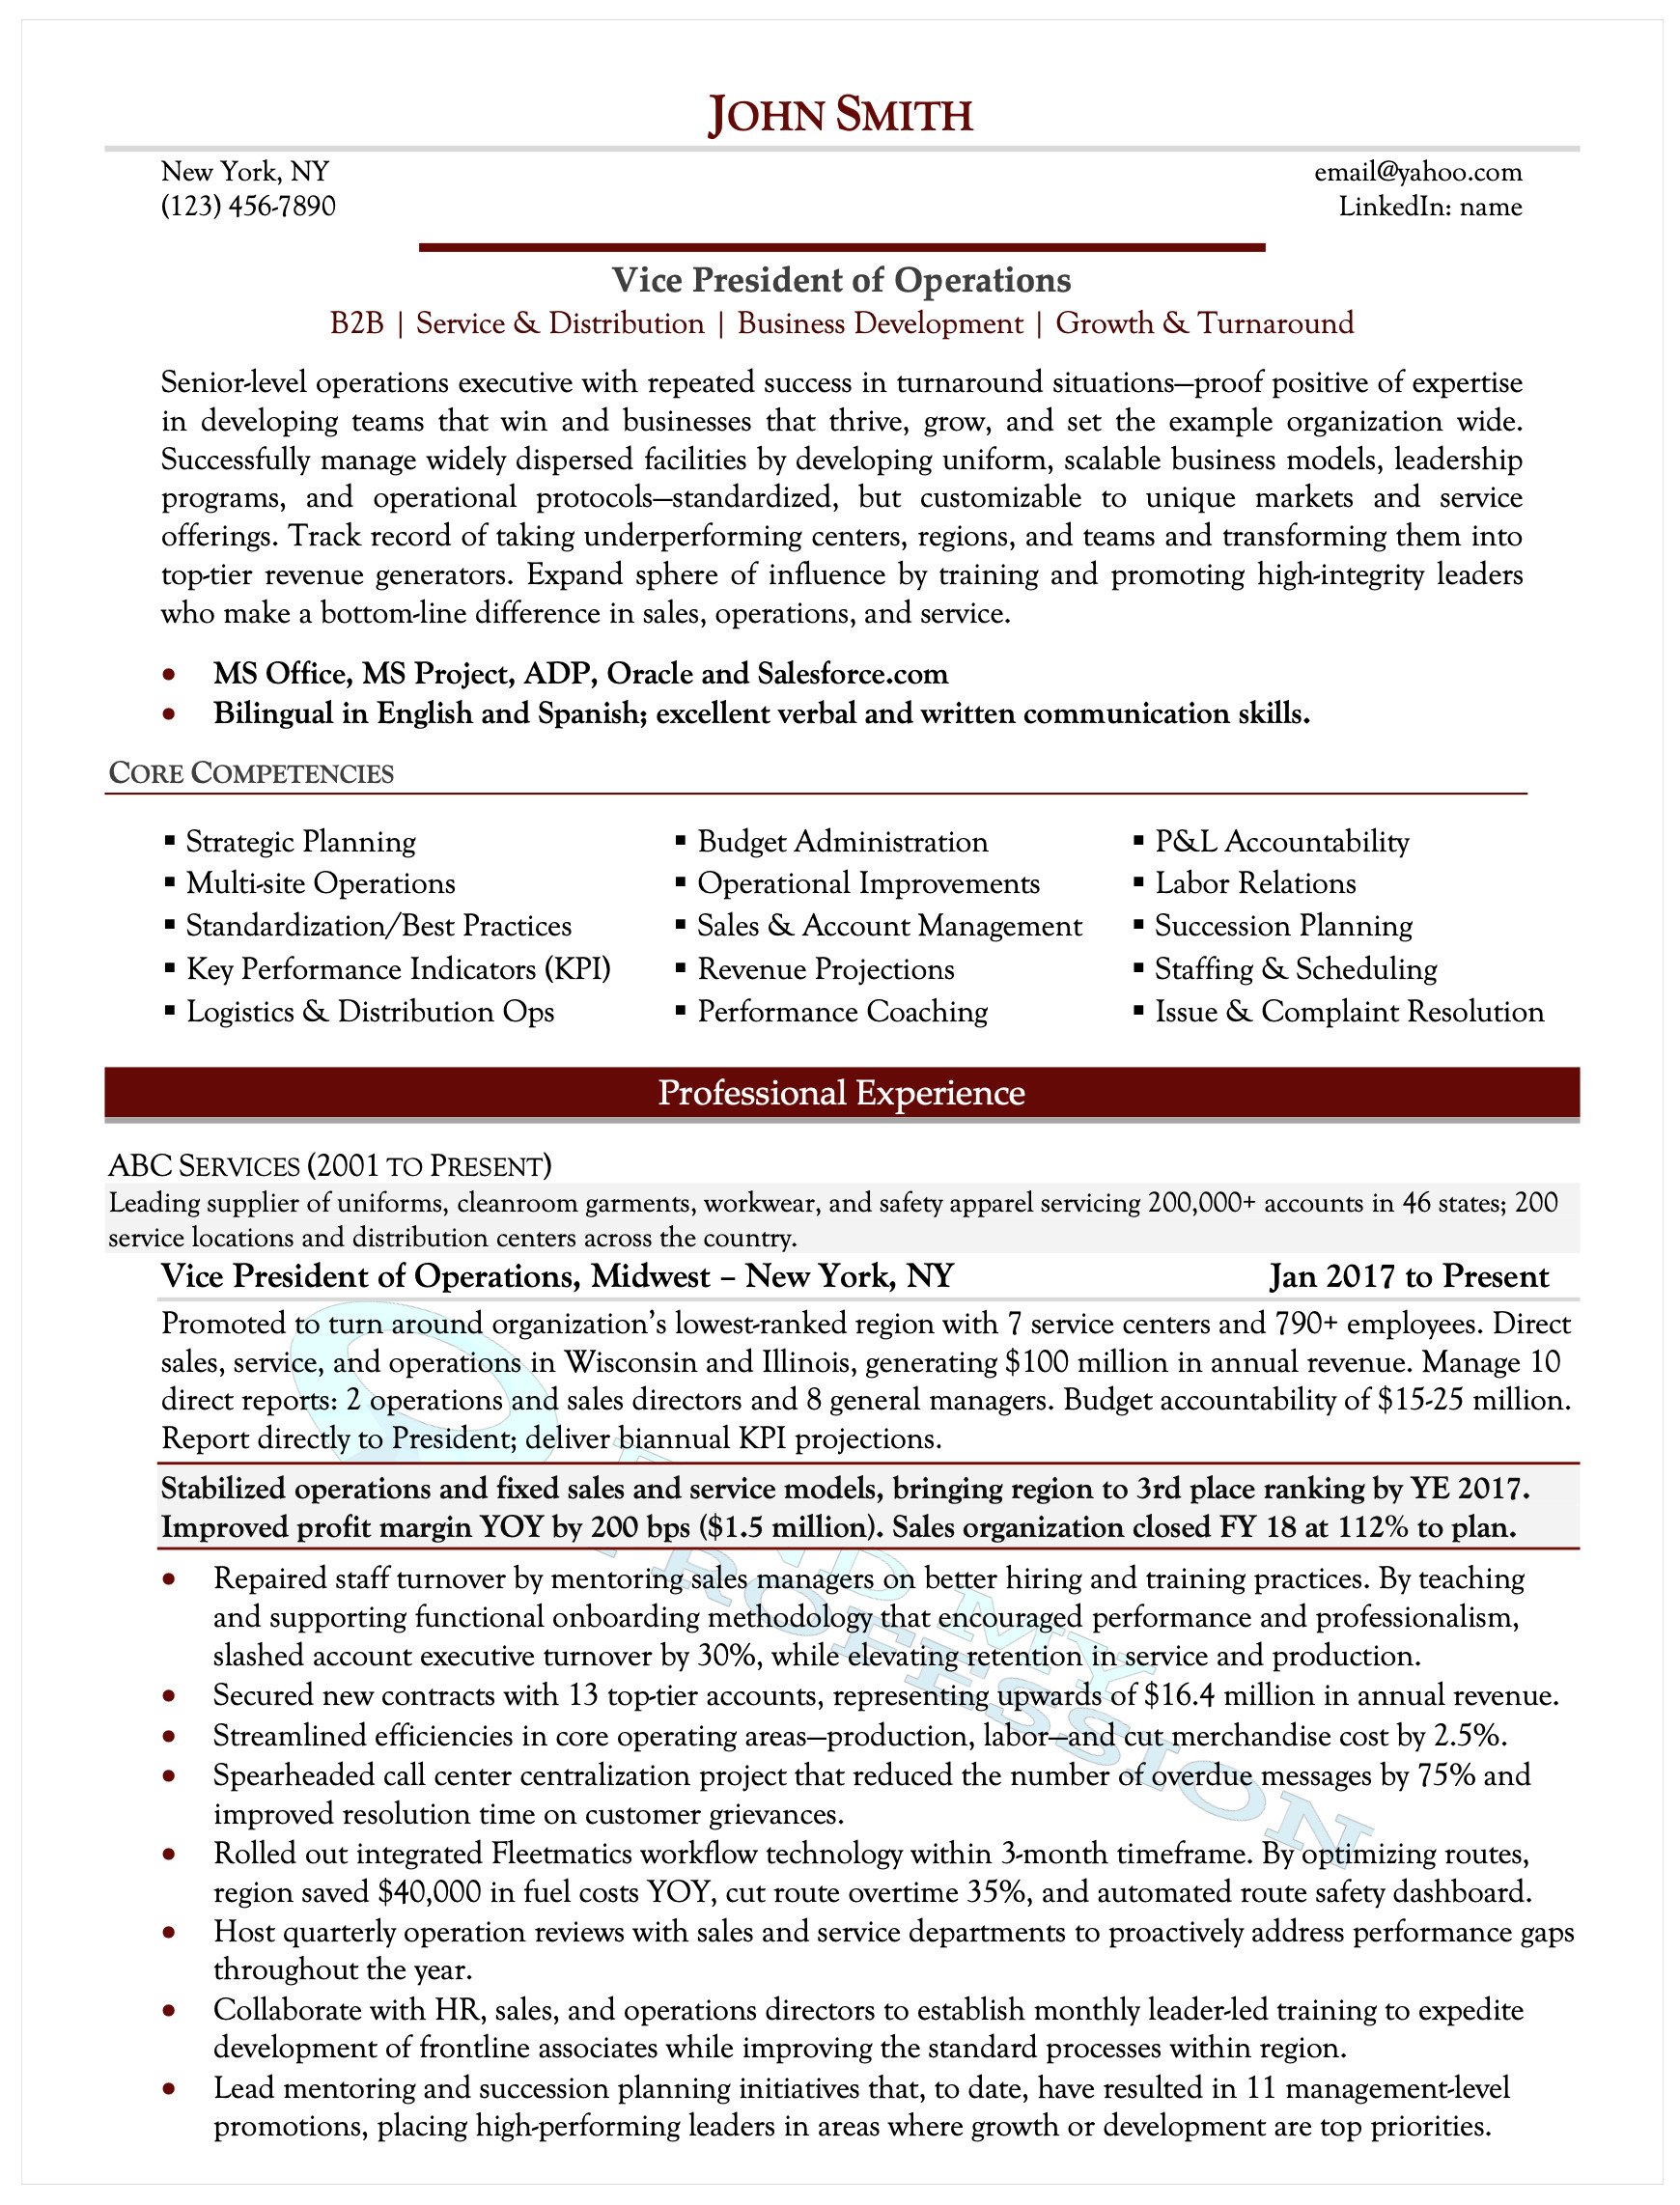 executive summary examples for resume